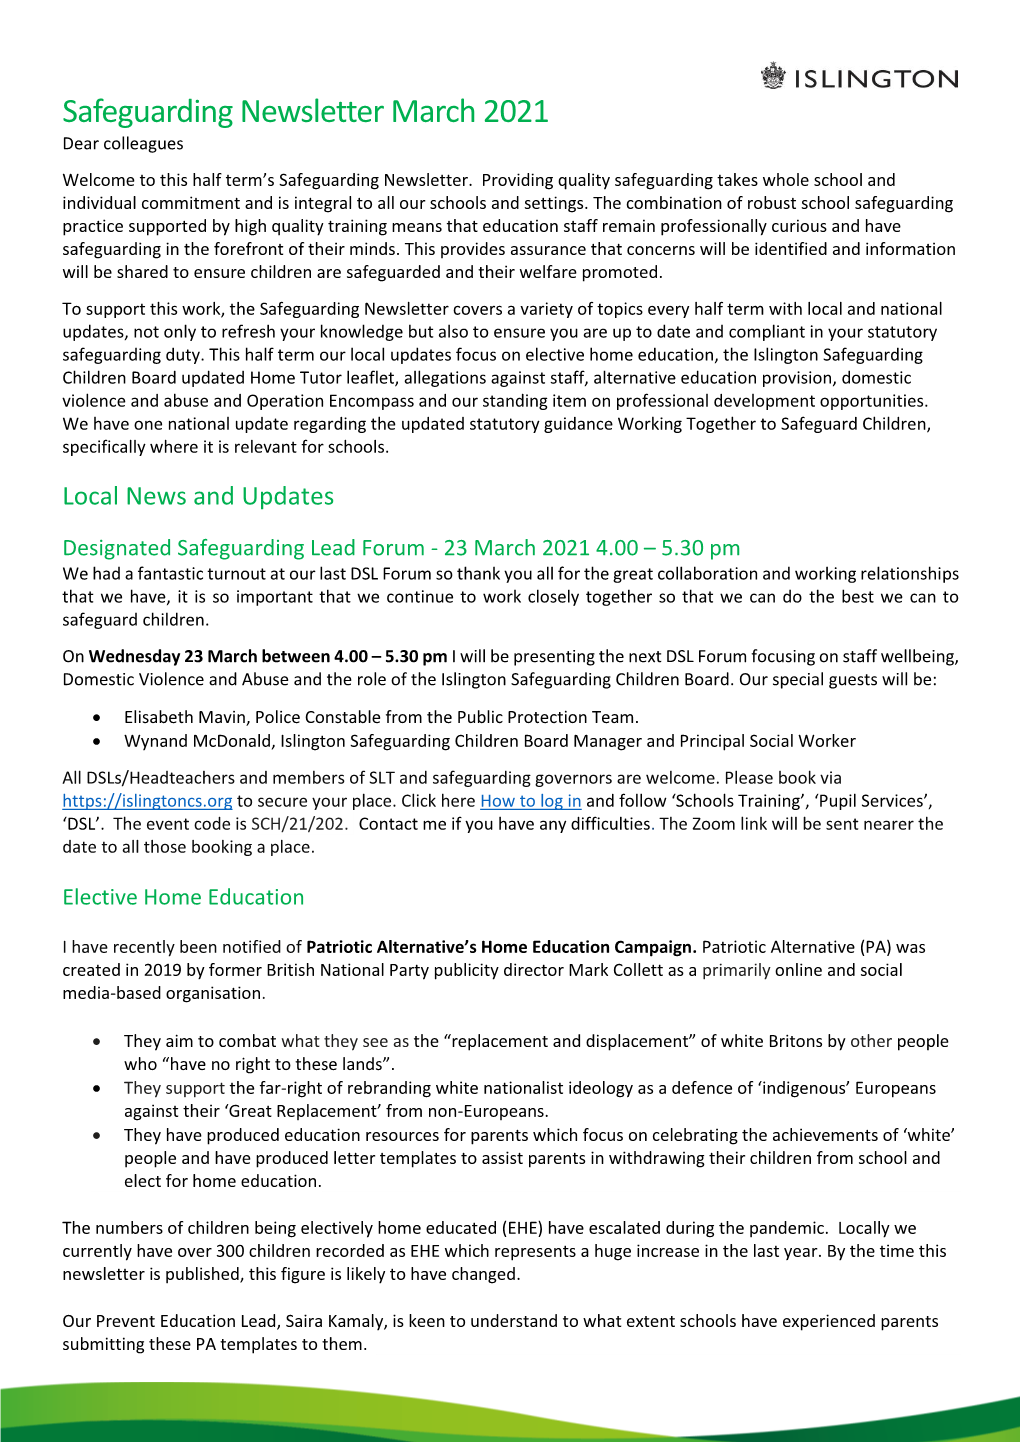 Safeguarding Newsletter March 2021 Dear Colleagues Welcome to This Half Term’S Safeguarding Newsletter